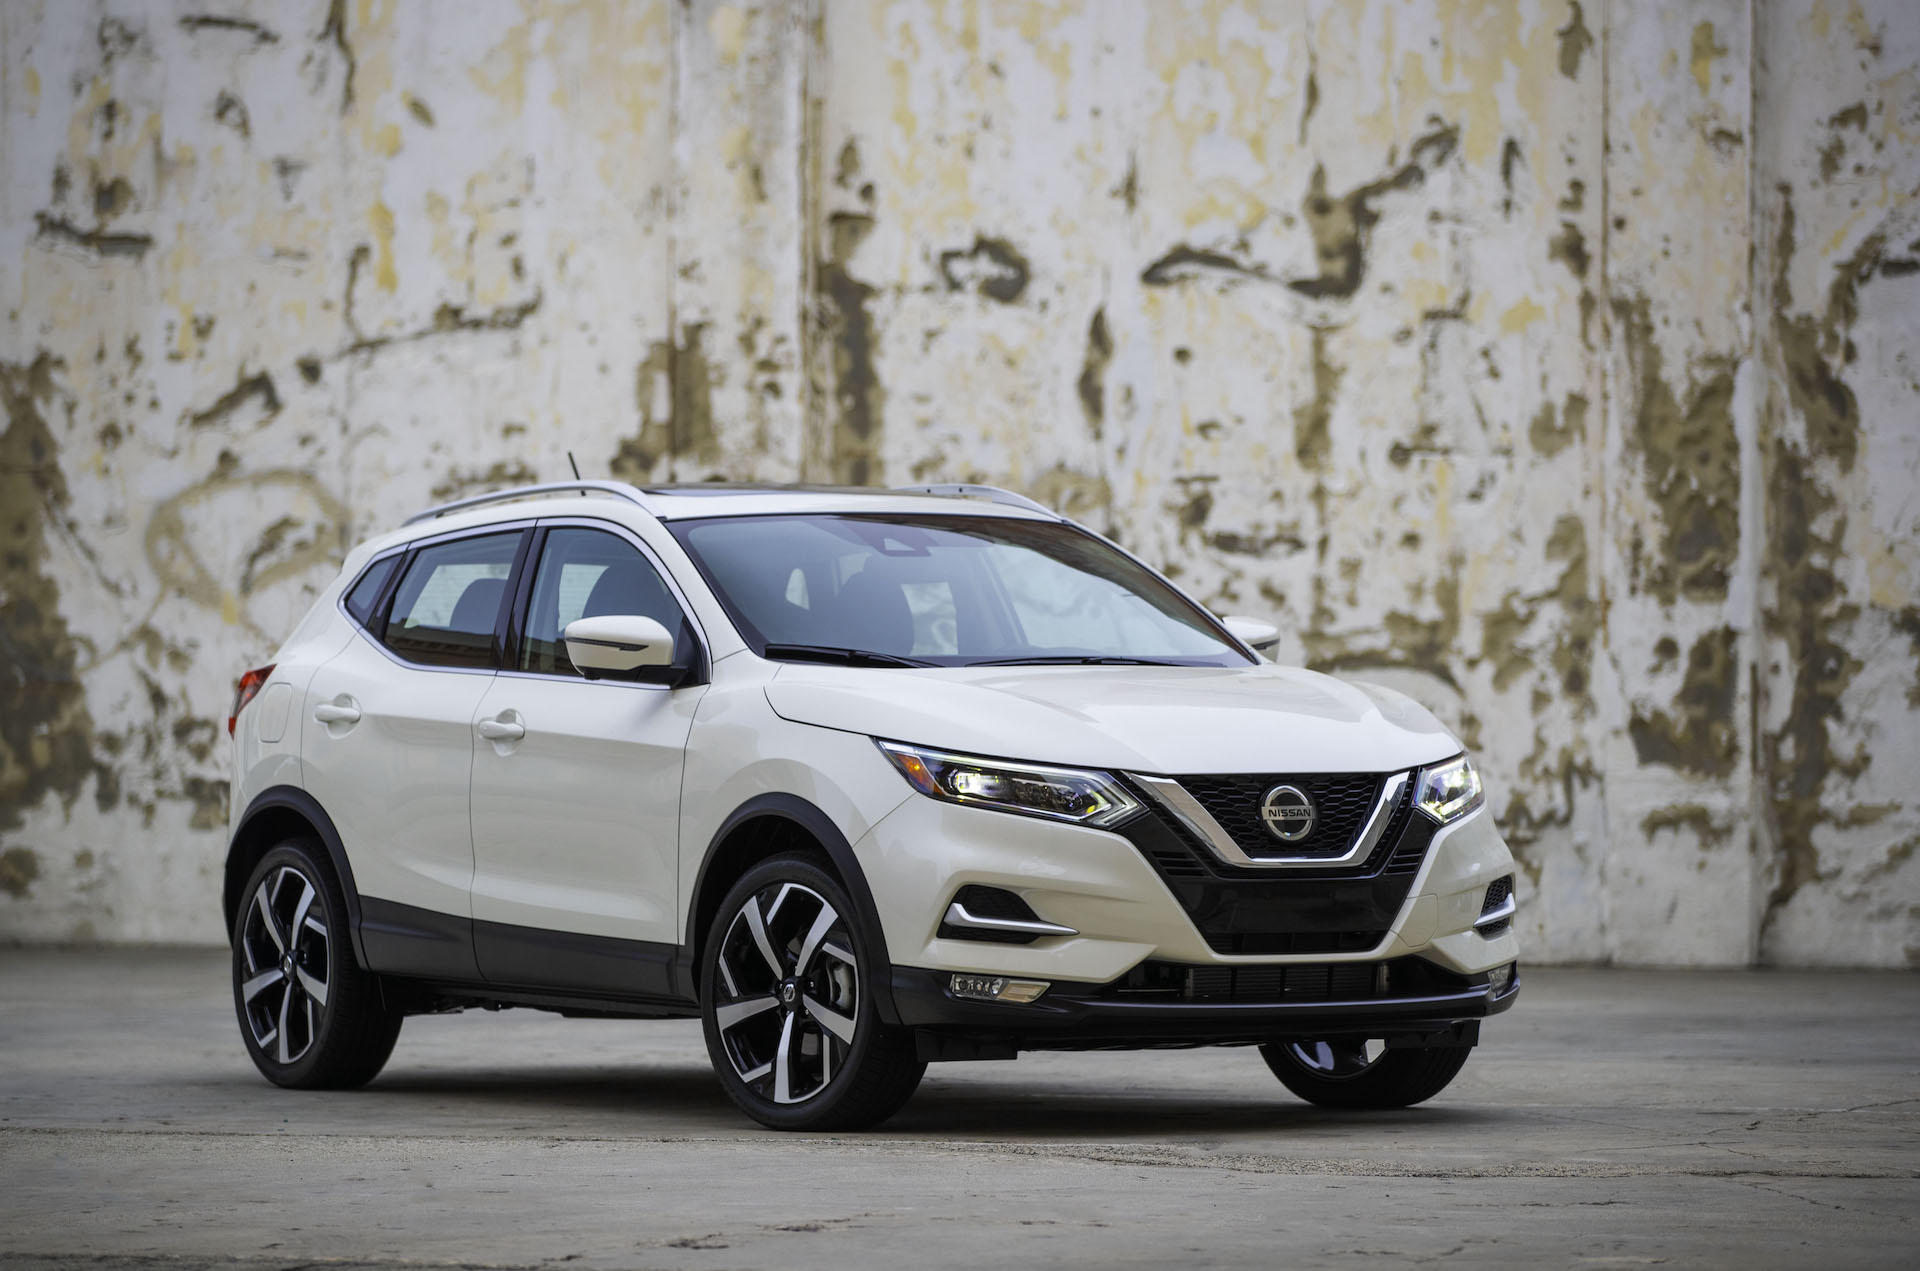 Nissan Rogue Sport Review Price Specs Features And Photos | My XXX Hot Girl